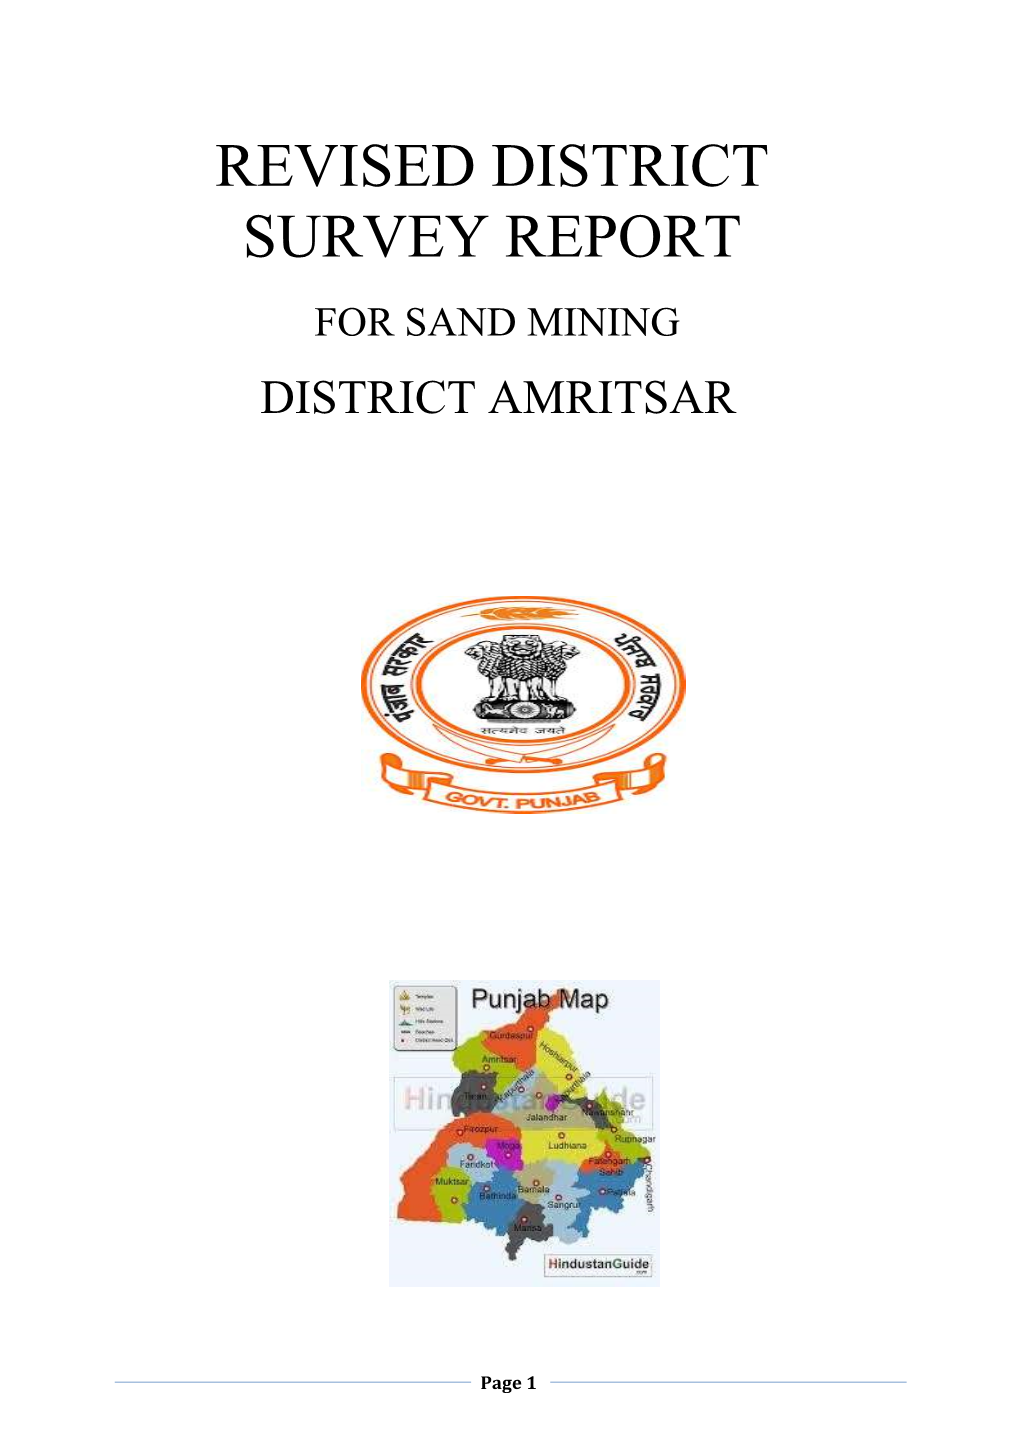 Revised District Survey Report for Sand Mining District Amritsar